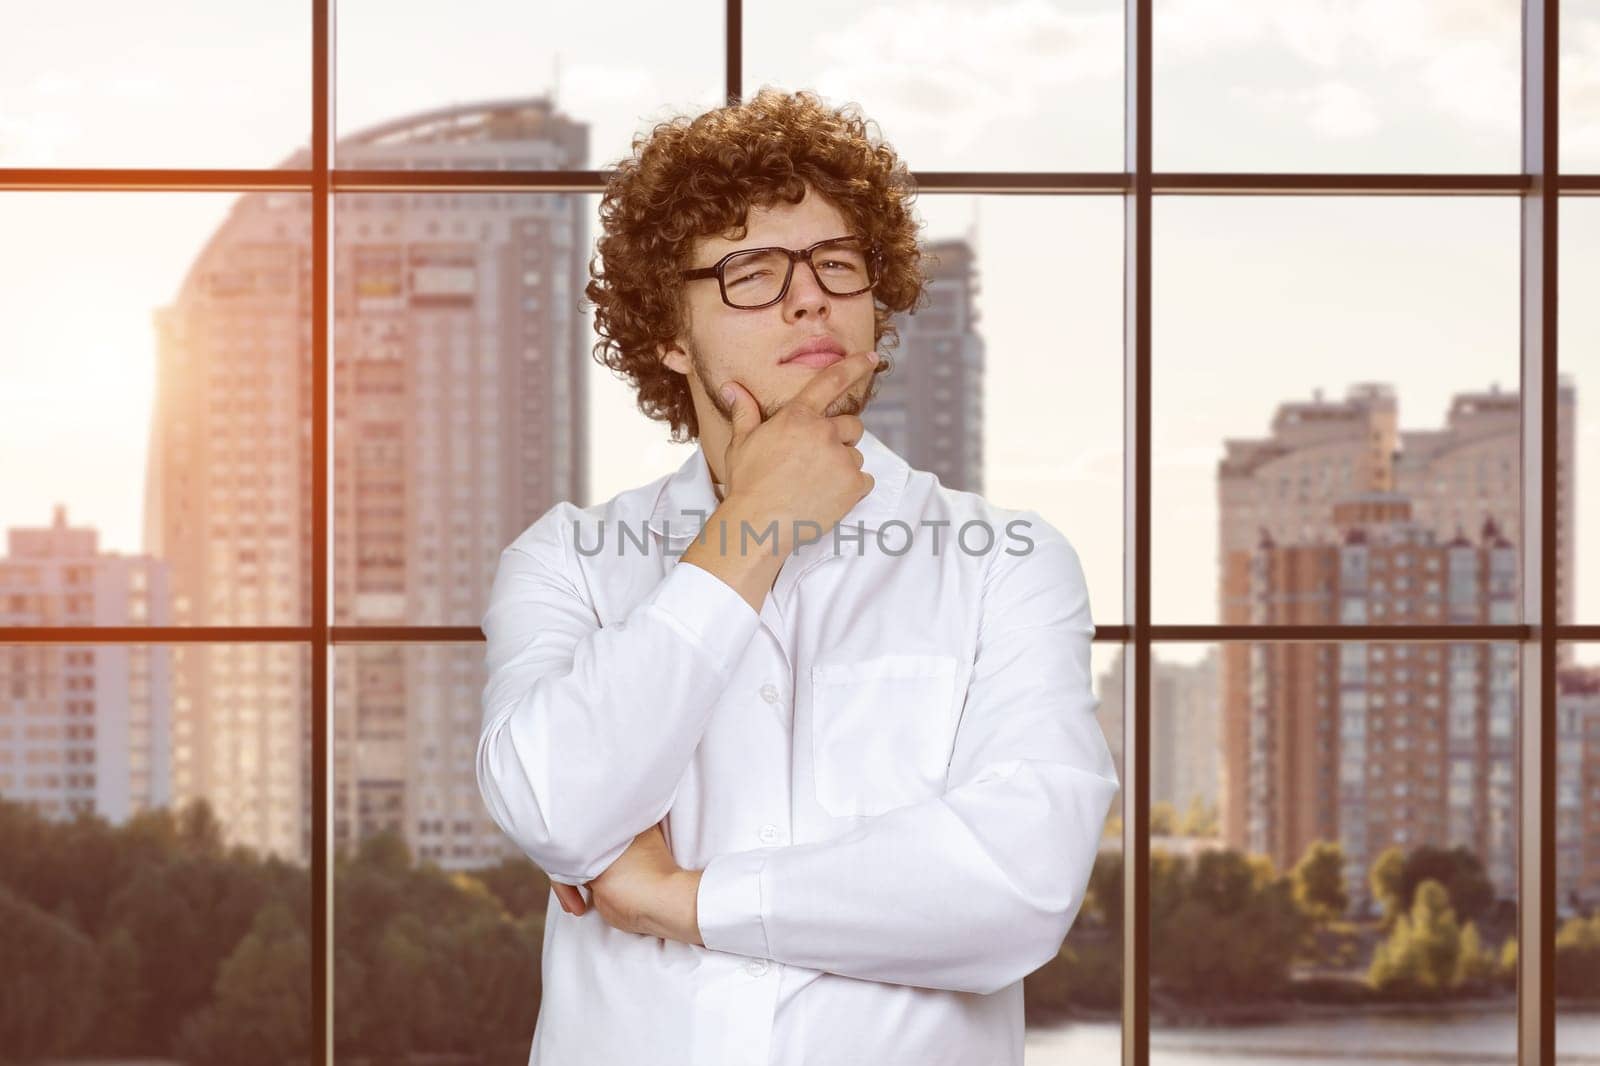 Portrait of a smart young man with glasses thinking about something. Checkered window with cityscape view in the background.